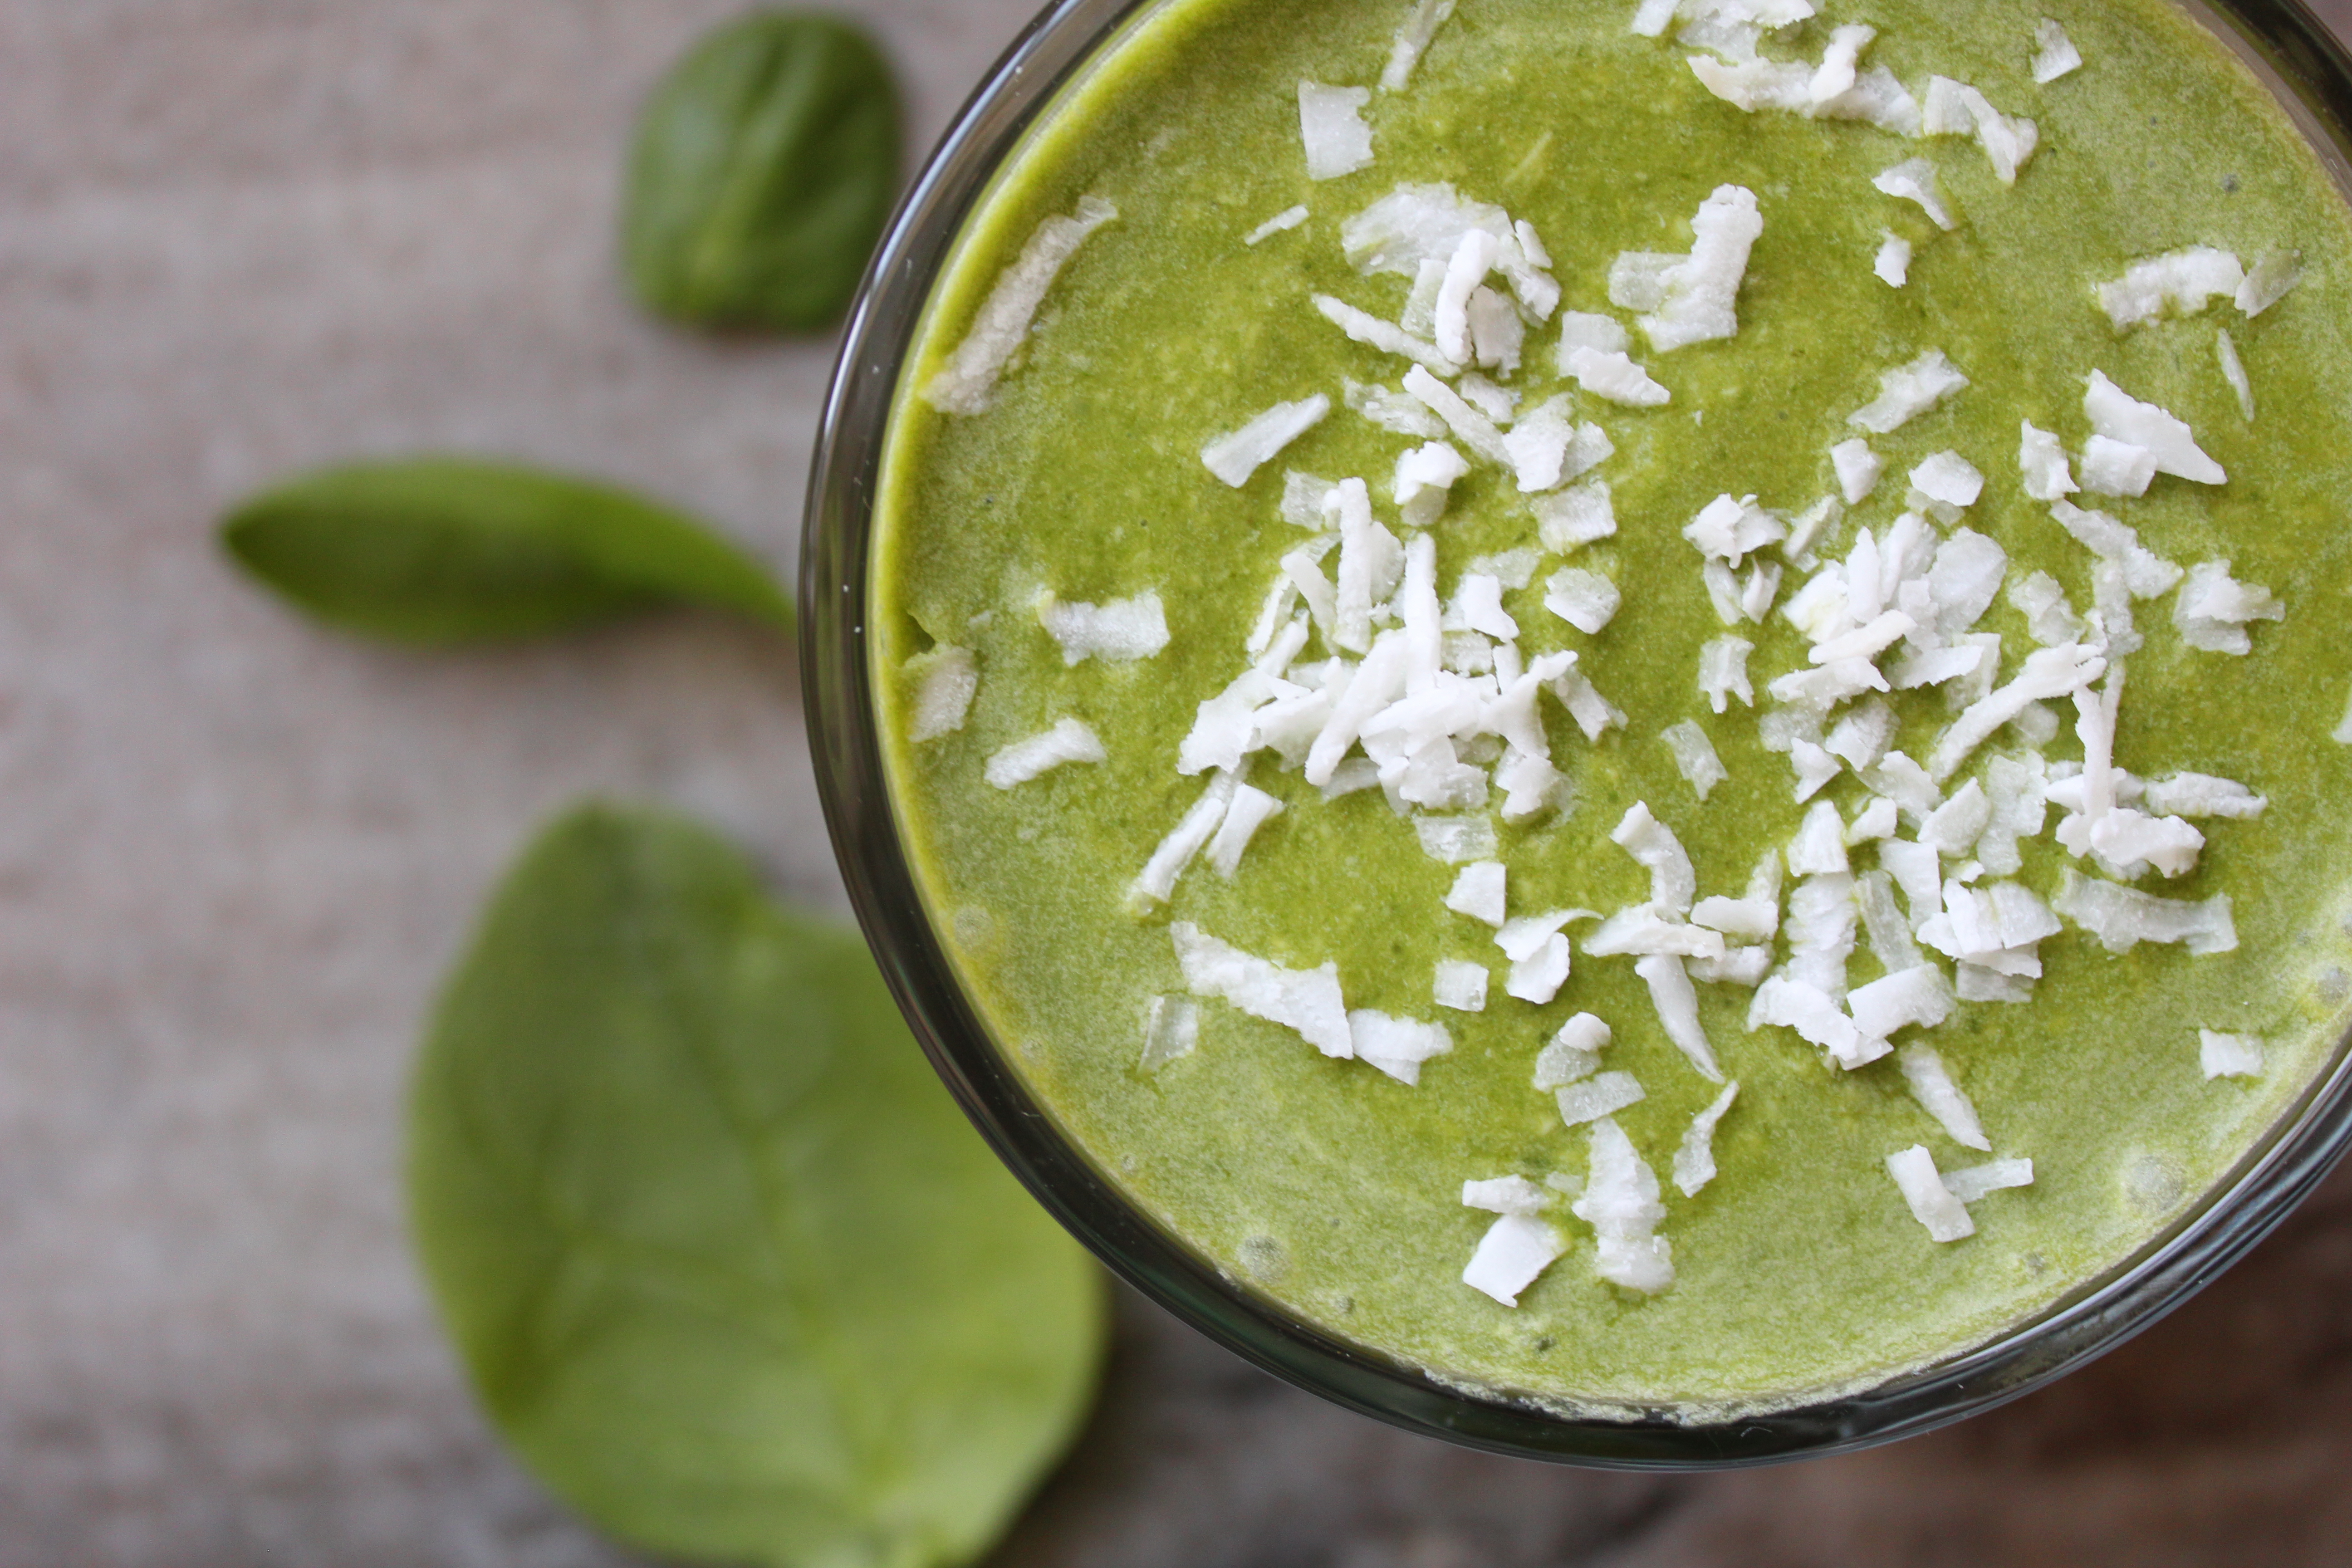 This deliciously tropical green smoothie is packed with spinach, sweet pineapple and banana, and a dash of matcha for some green tea flavor!